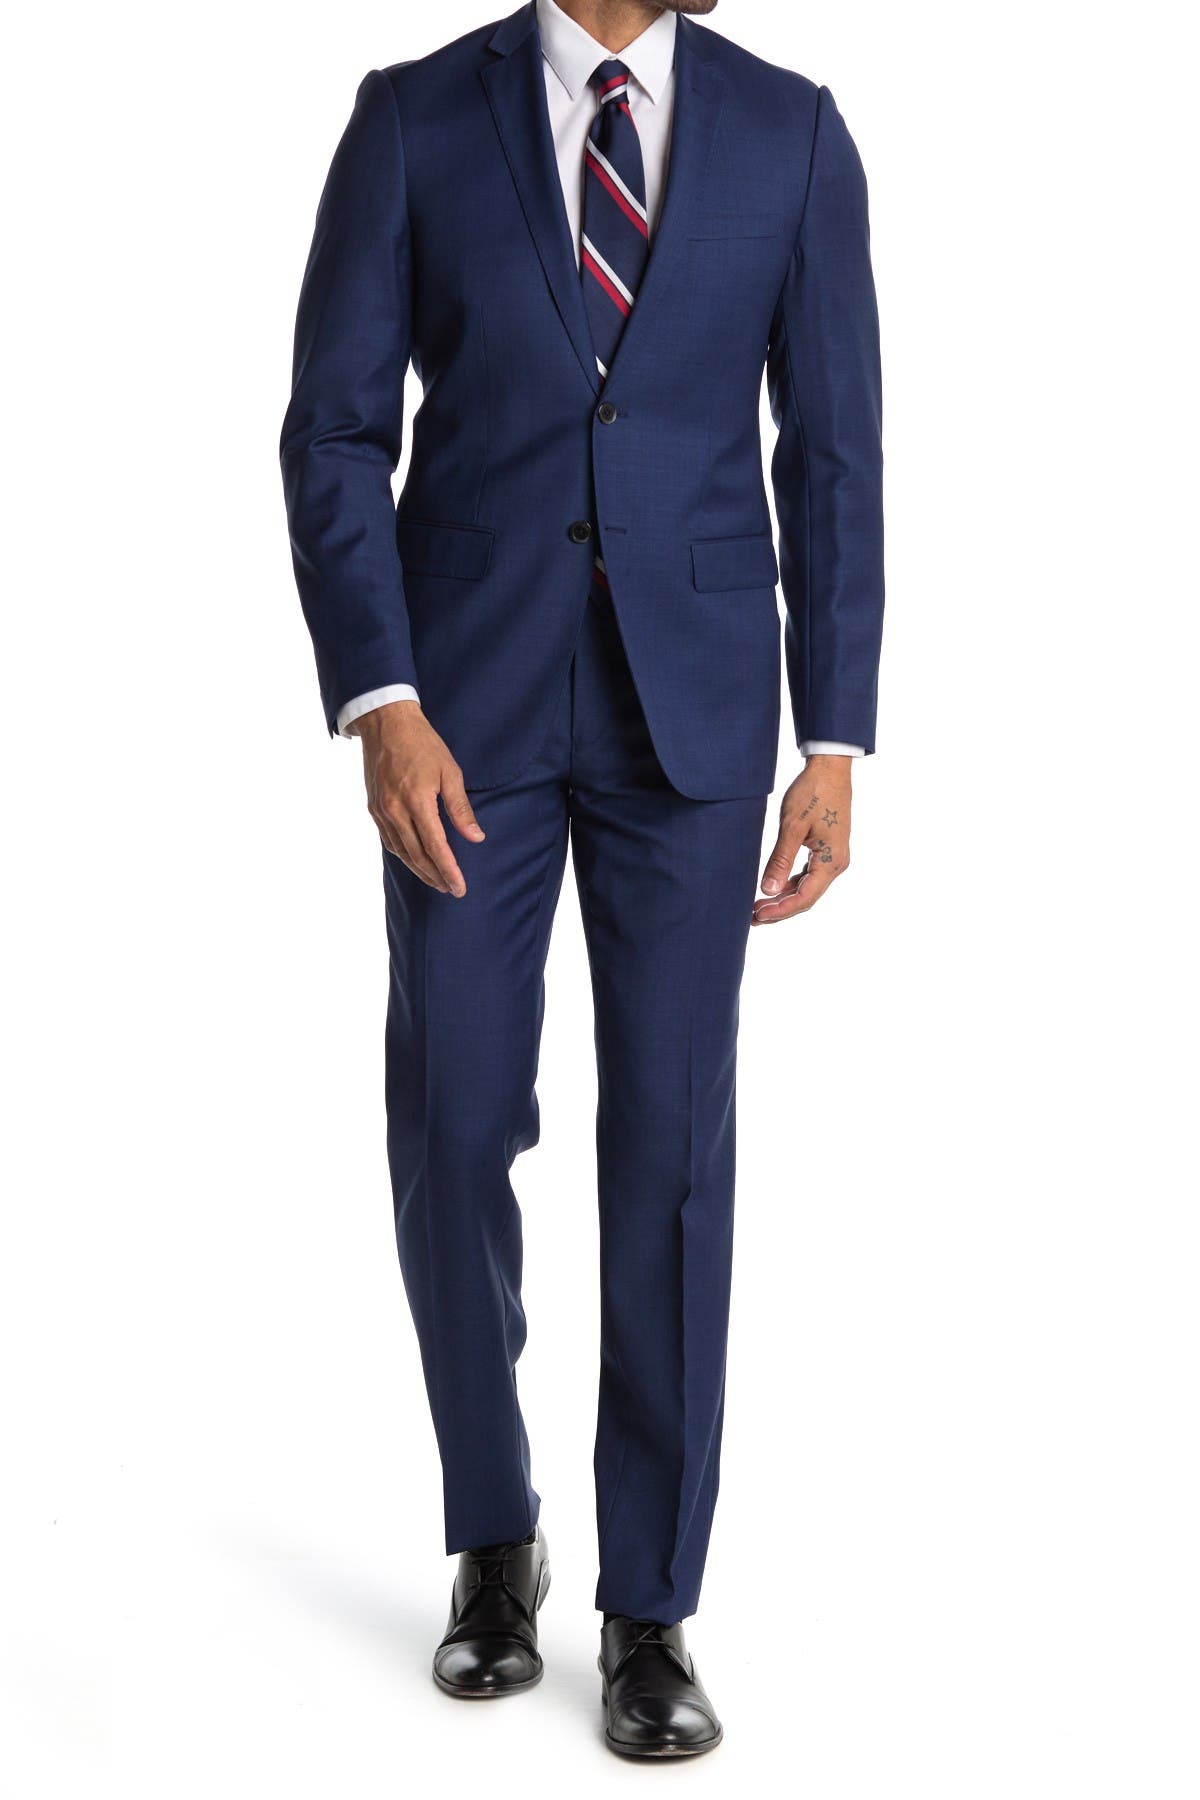 Emigre Mens Extra Slim Fit Sharkskin Chambray Three Piece Suit With Peak Lapels